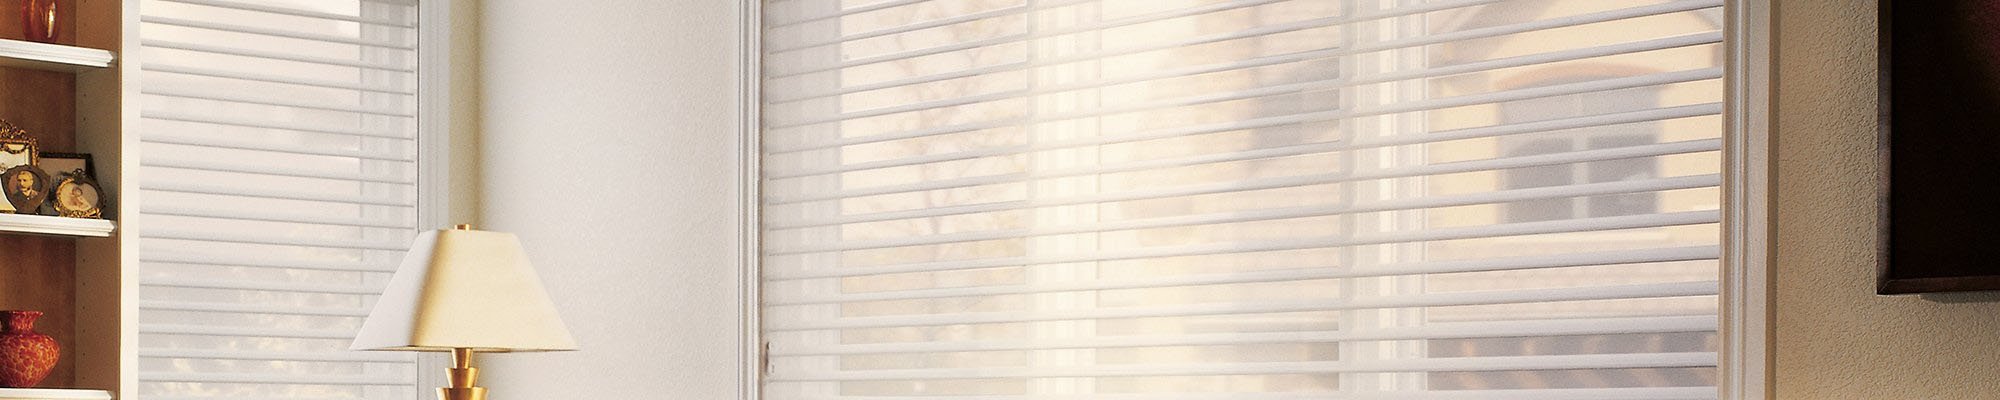 Window treatment services provided by Solutions